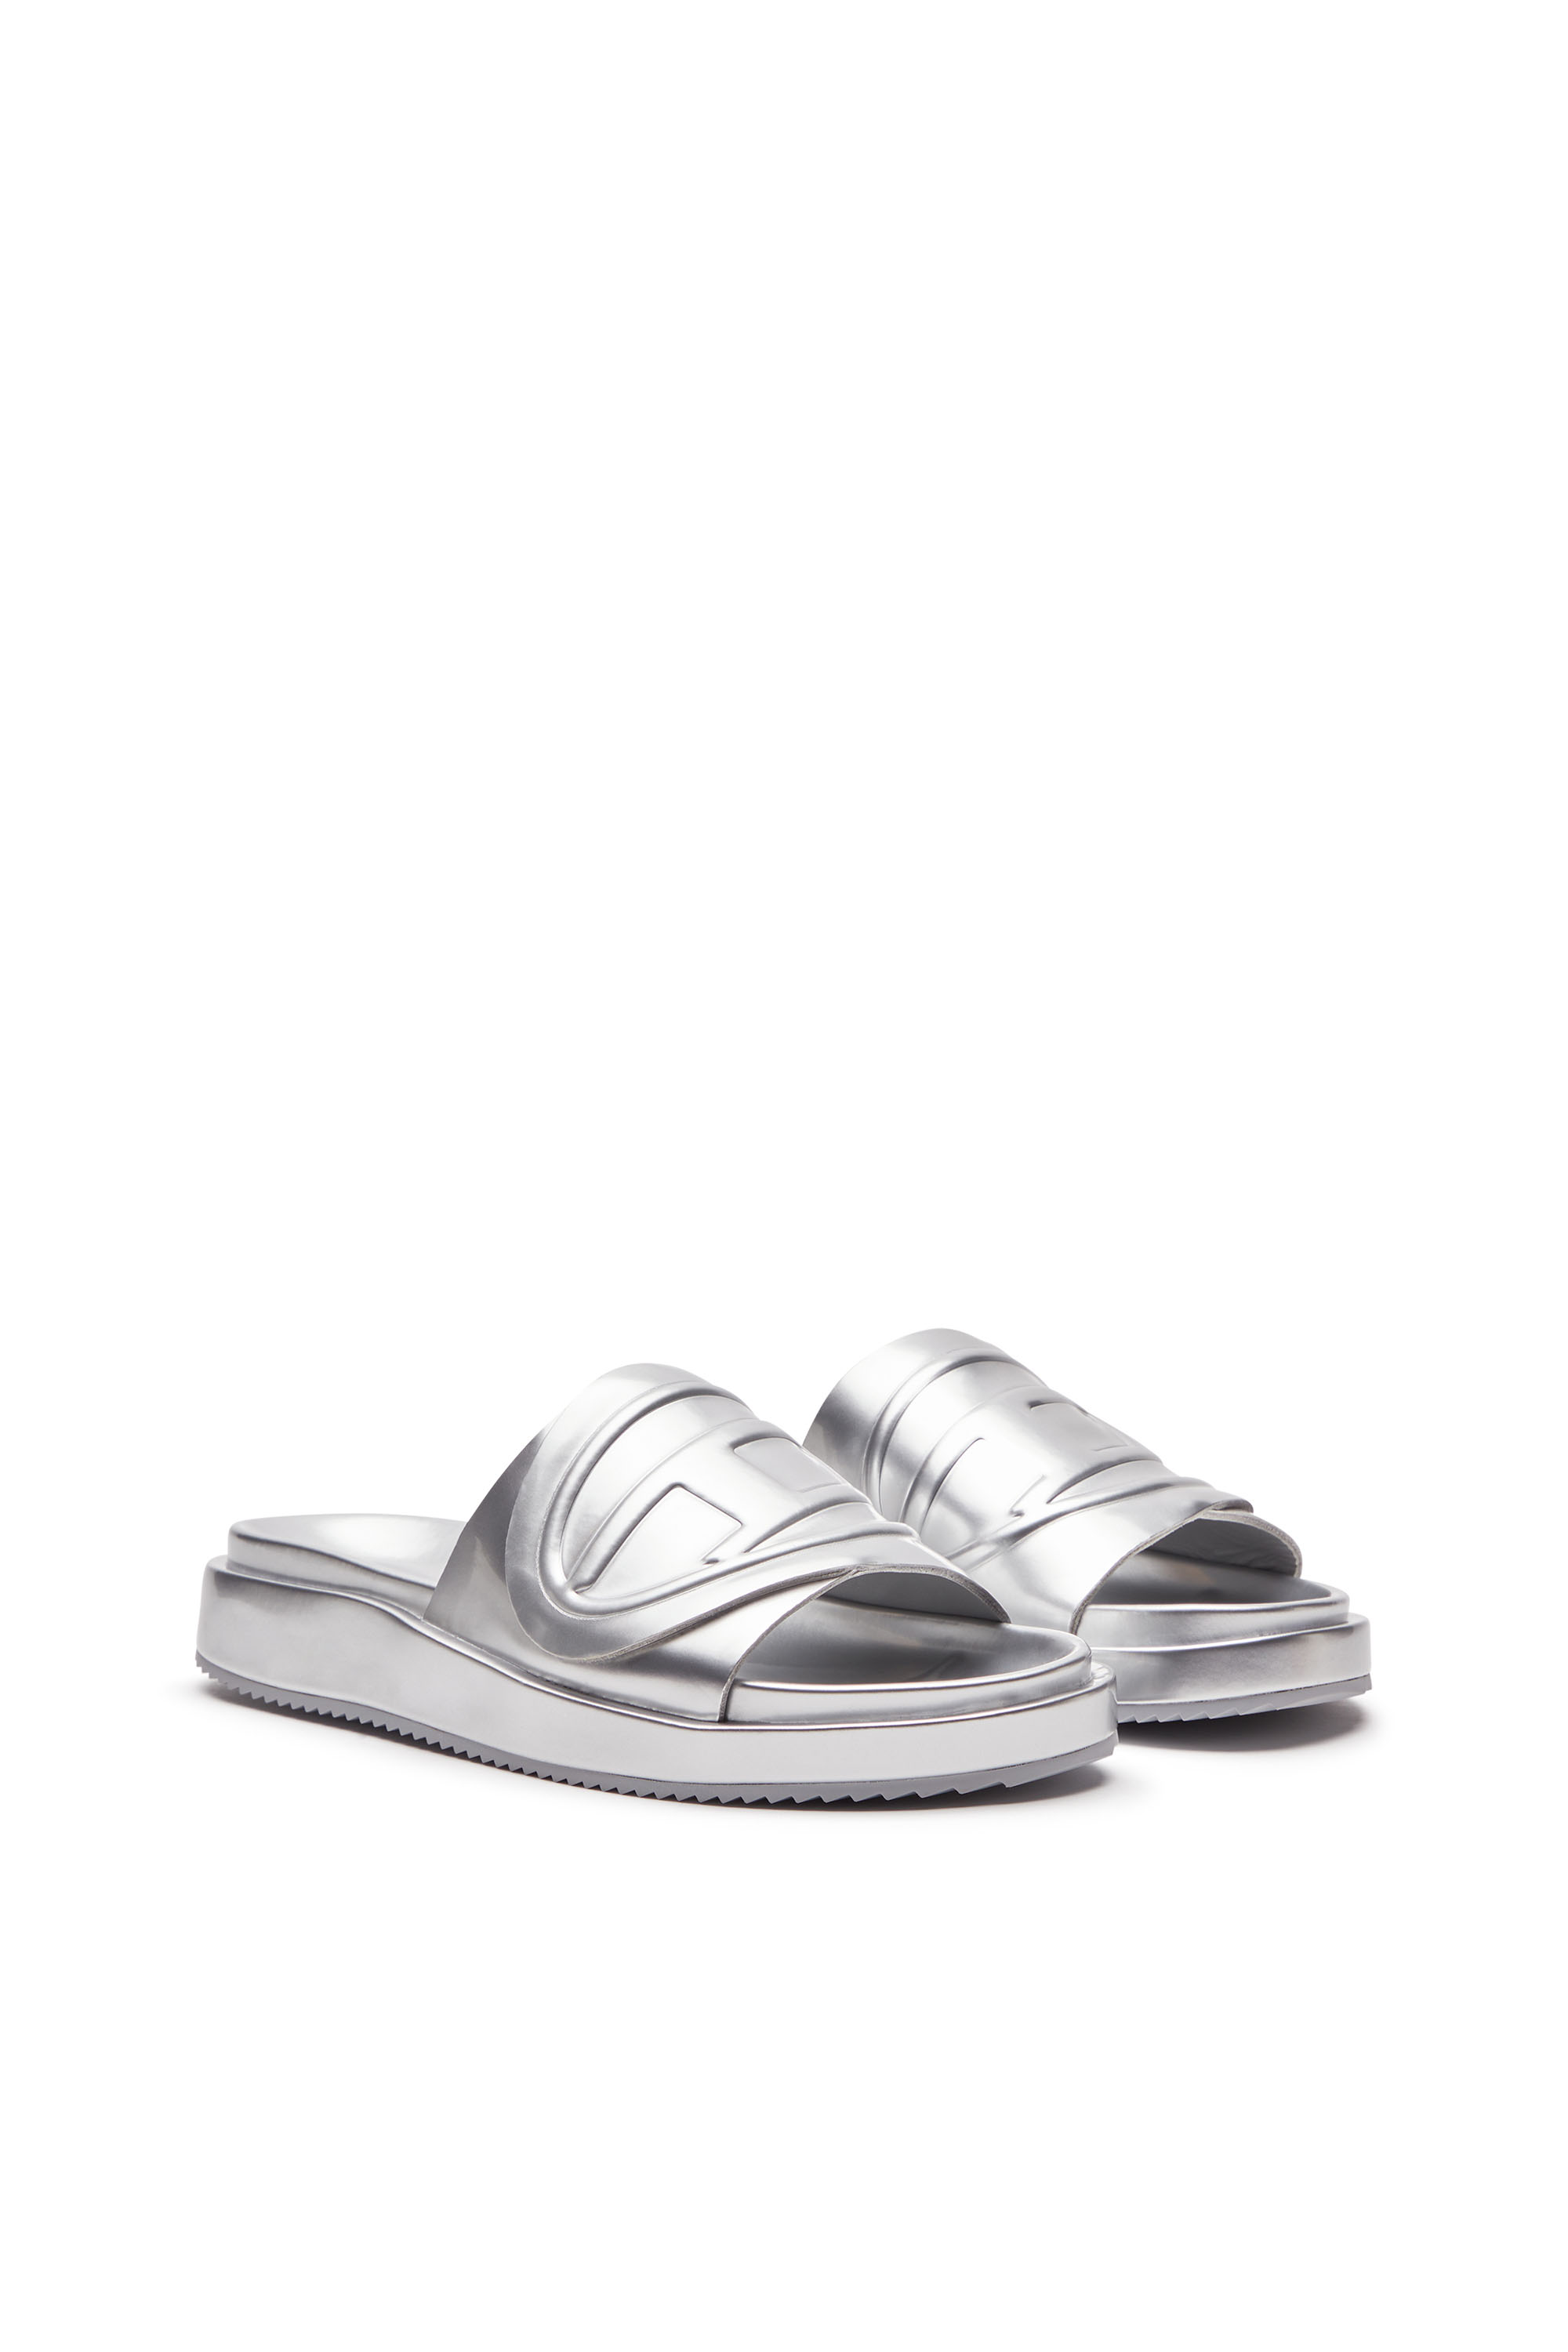 Diesel - SA-SLIDE D OVAL W, Woman Sa-Slide D-Metallic slide sandals with Oval D strap in Silver - Image 2